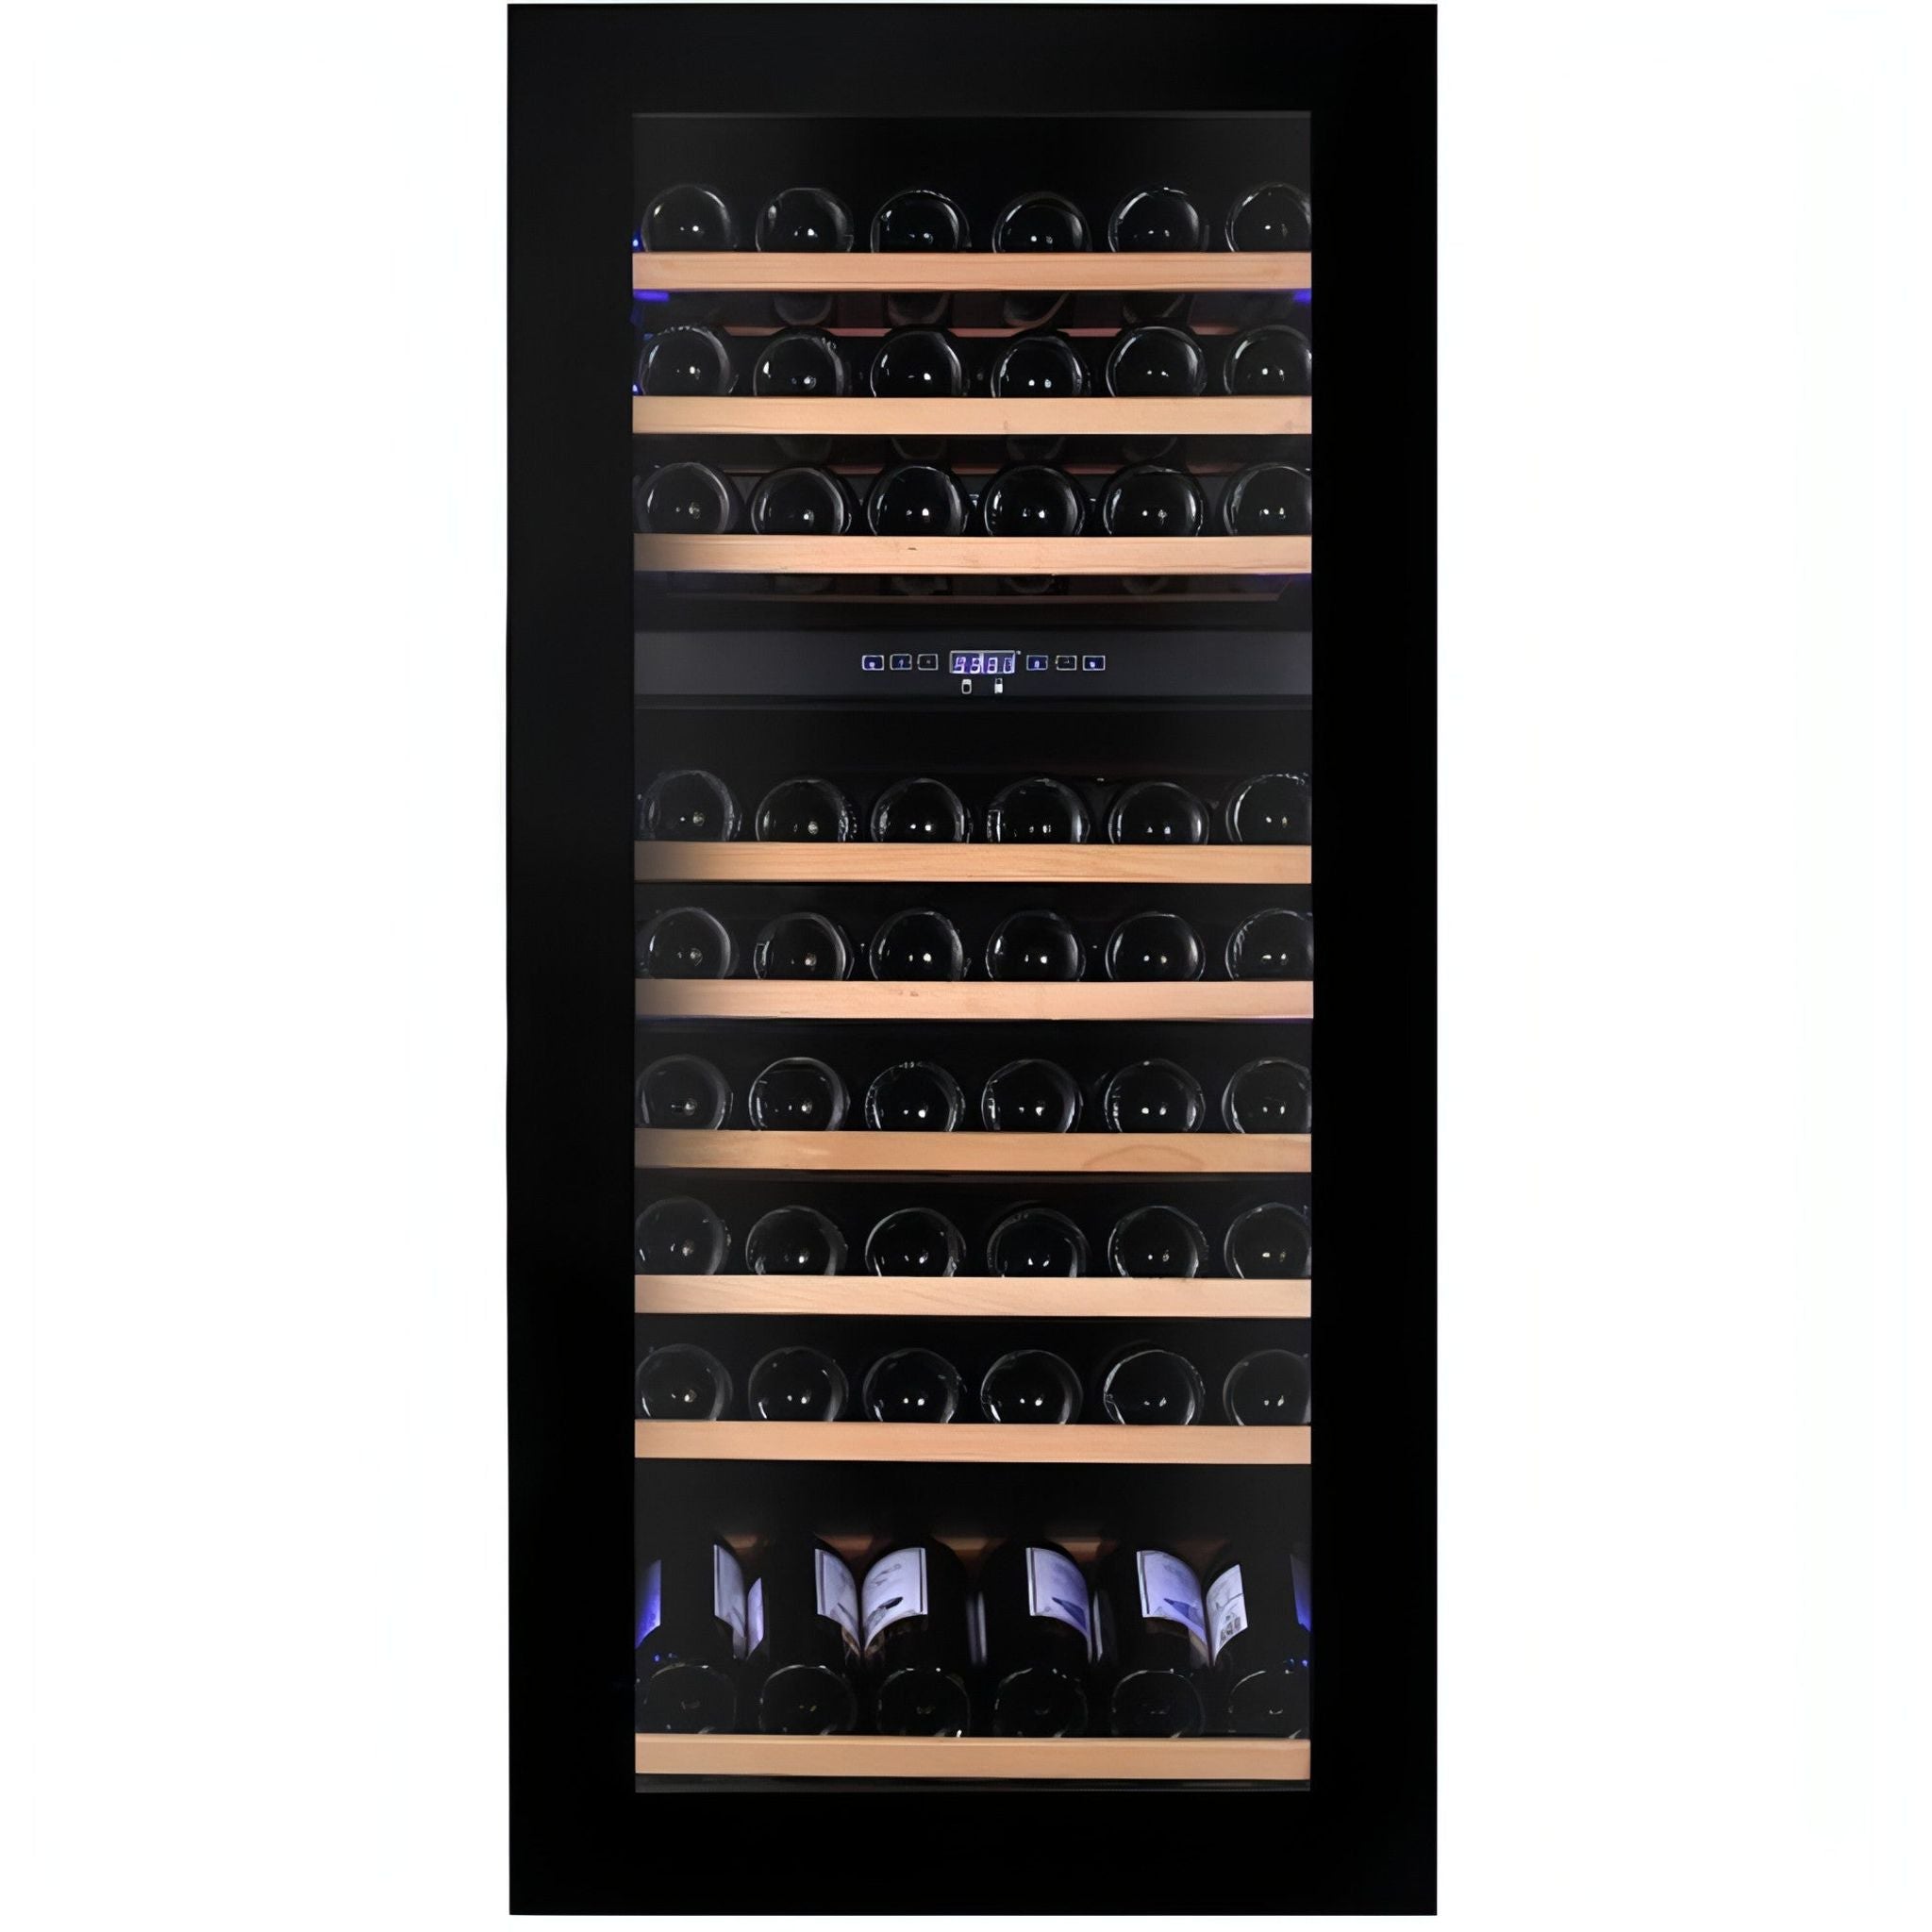 Dunavox GLANCE-72 - Dual Zone 72 Bottle - Integrated Wine Cooler - DAVG-72.185DB.TO